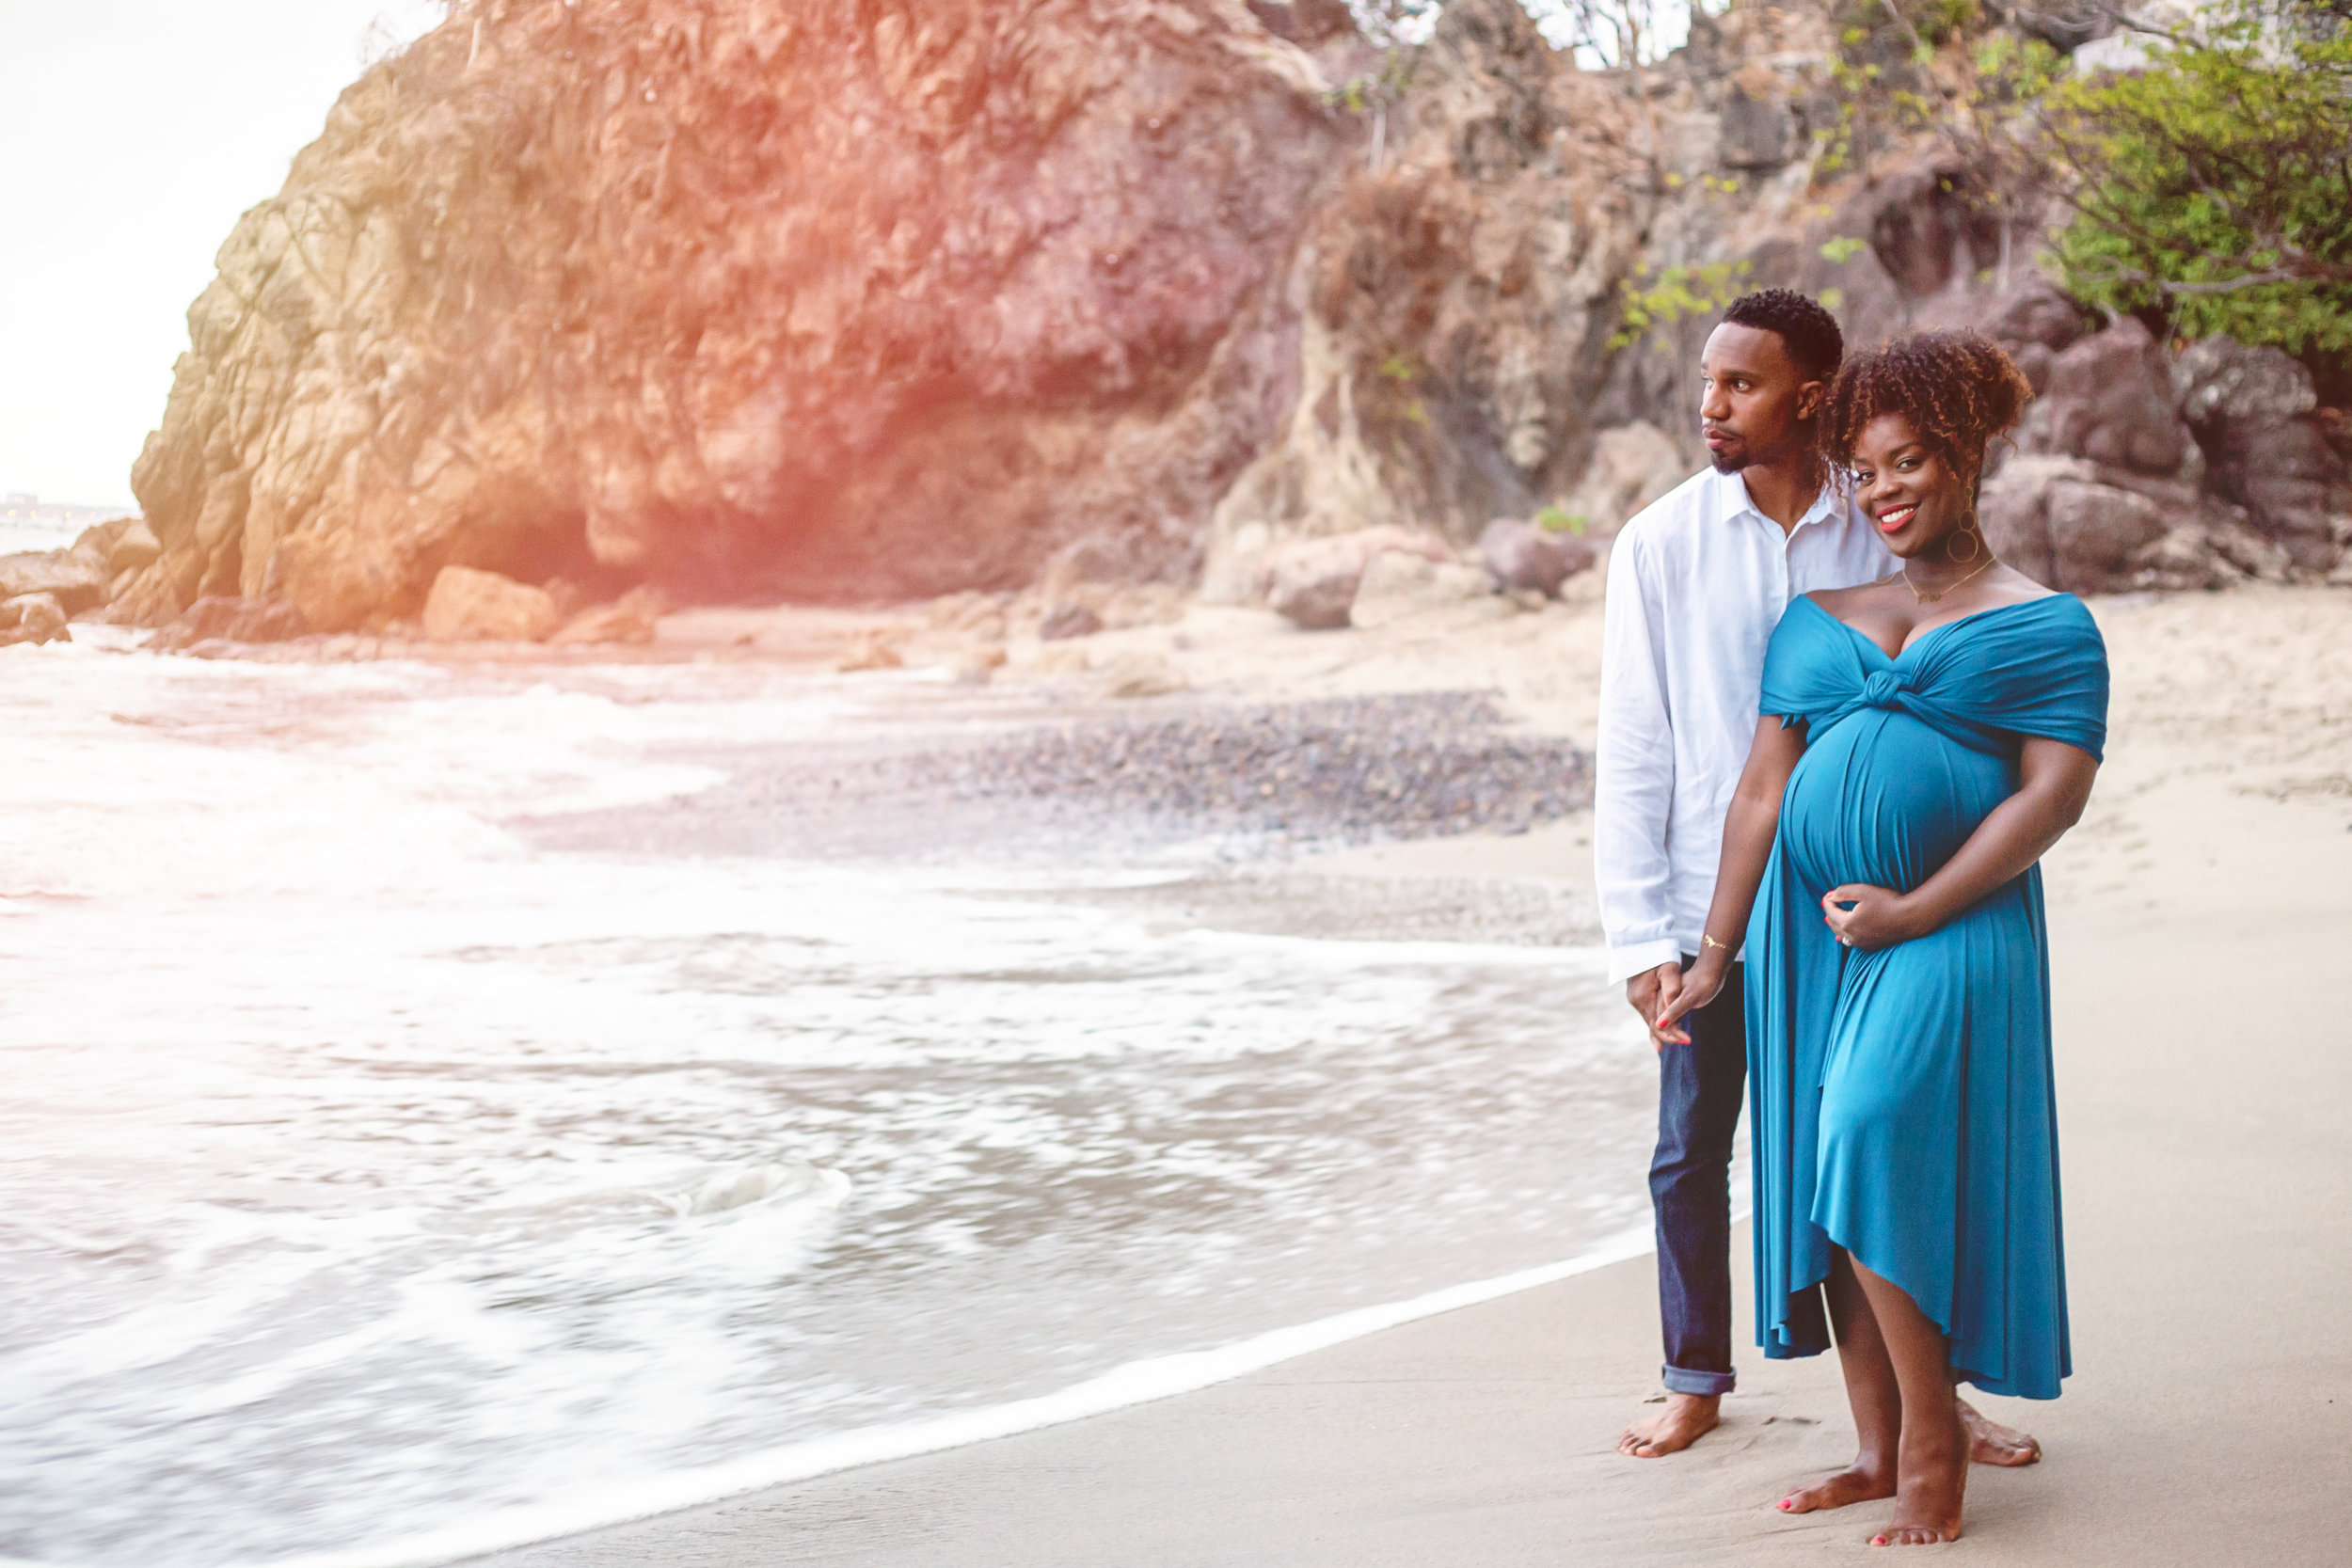 We enjoyed our maternity shoot. Your patience and ease of nature allowed us to relax and focus on the moment!